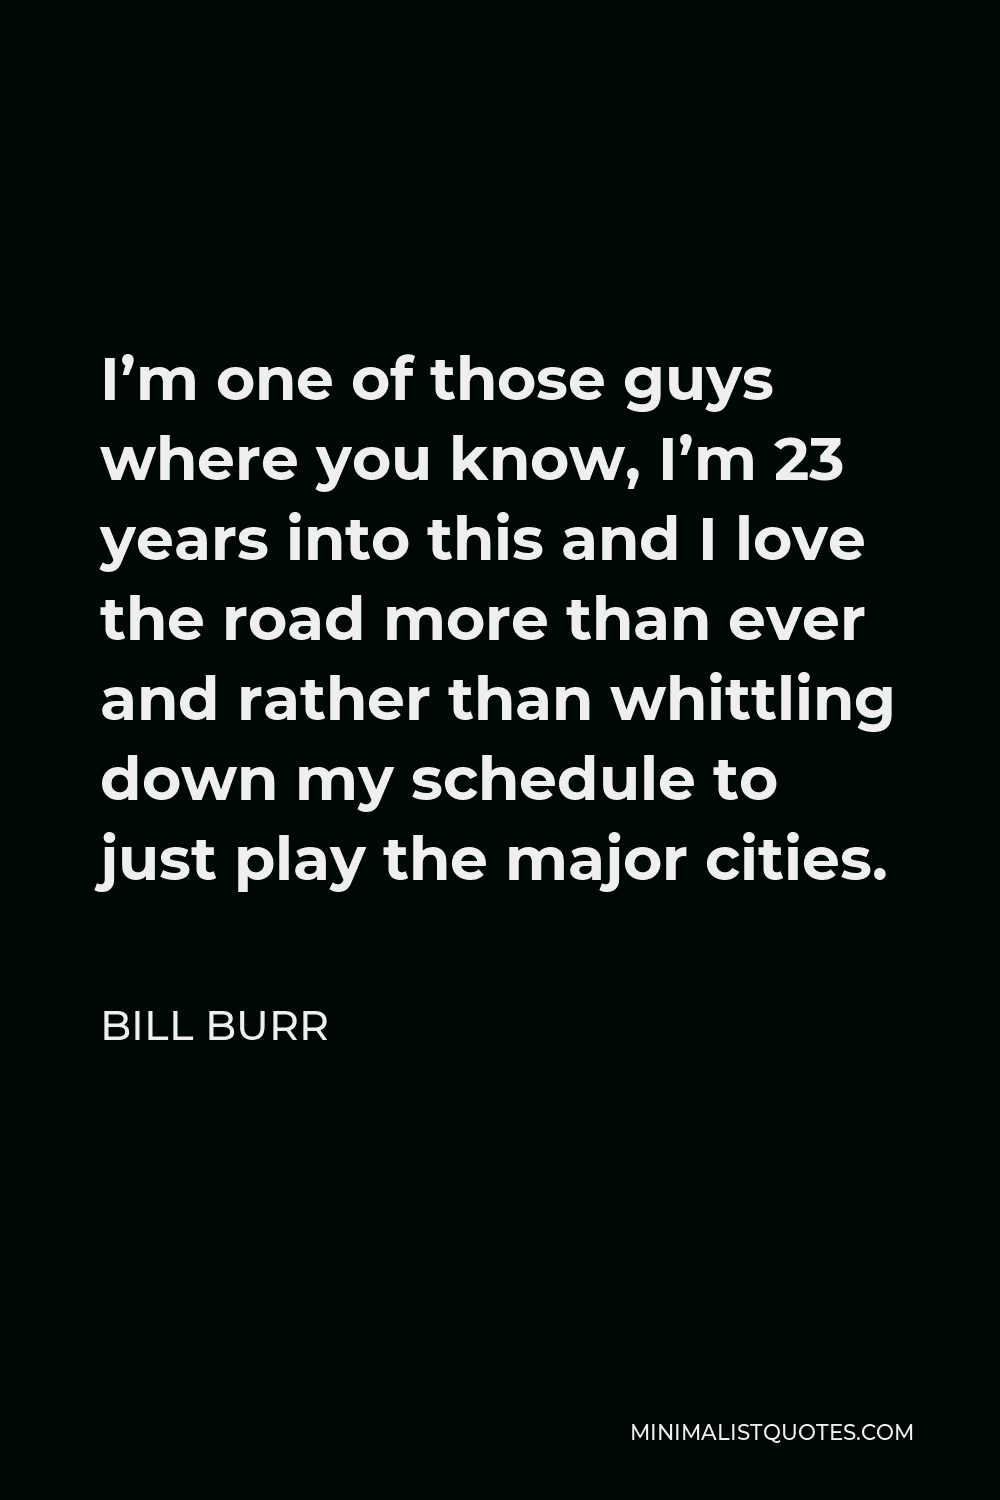 Bill Burr Quote - I’m one of those guys where you know, I’m 23 years into this and I love the road more than ever and rather than whittling down my schedule to just play the major cities.